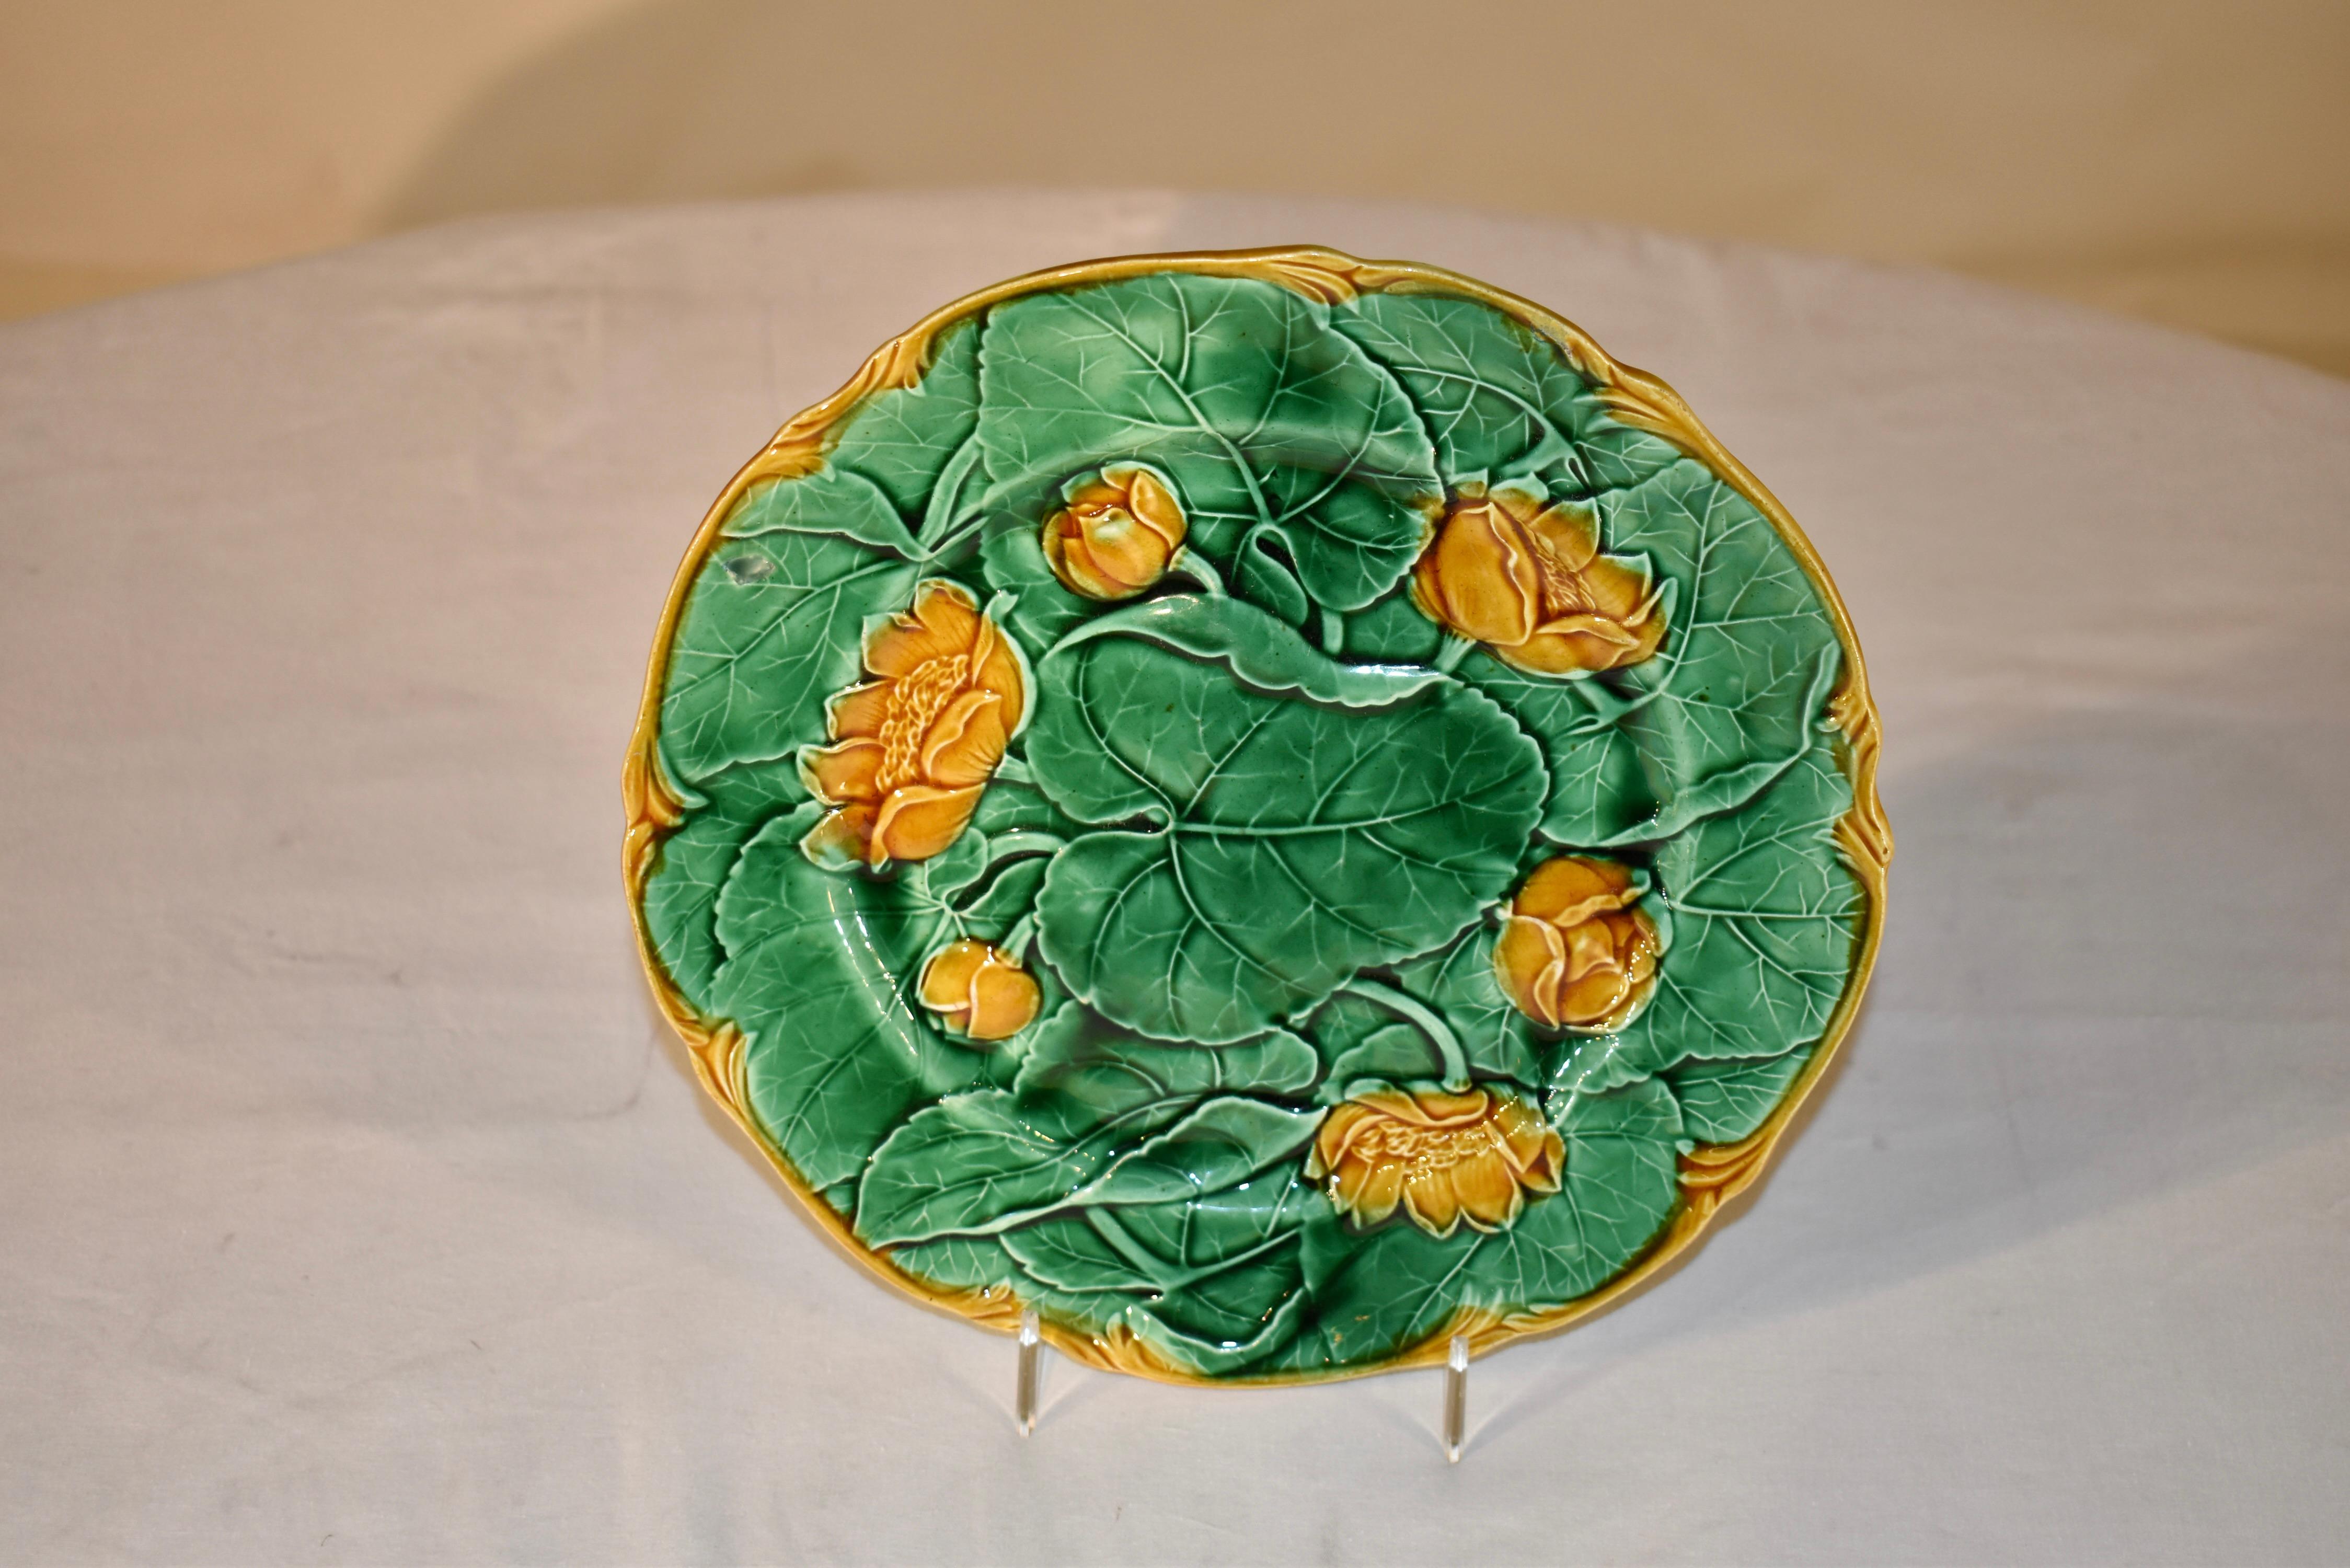 19th Century English Majolica Plate In Good Condition For Sale In High Point, NC